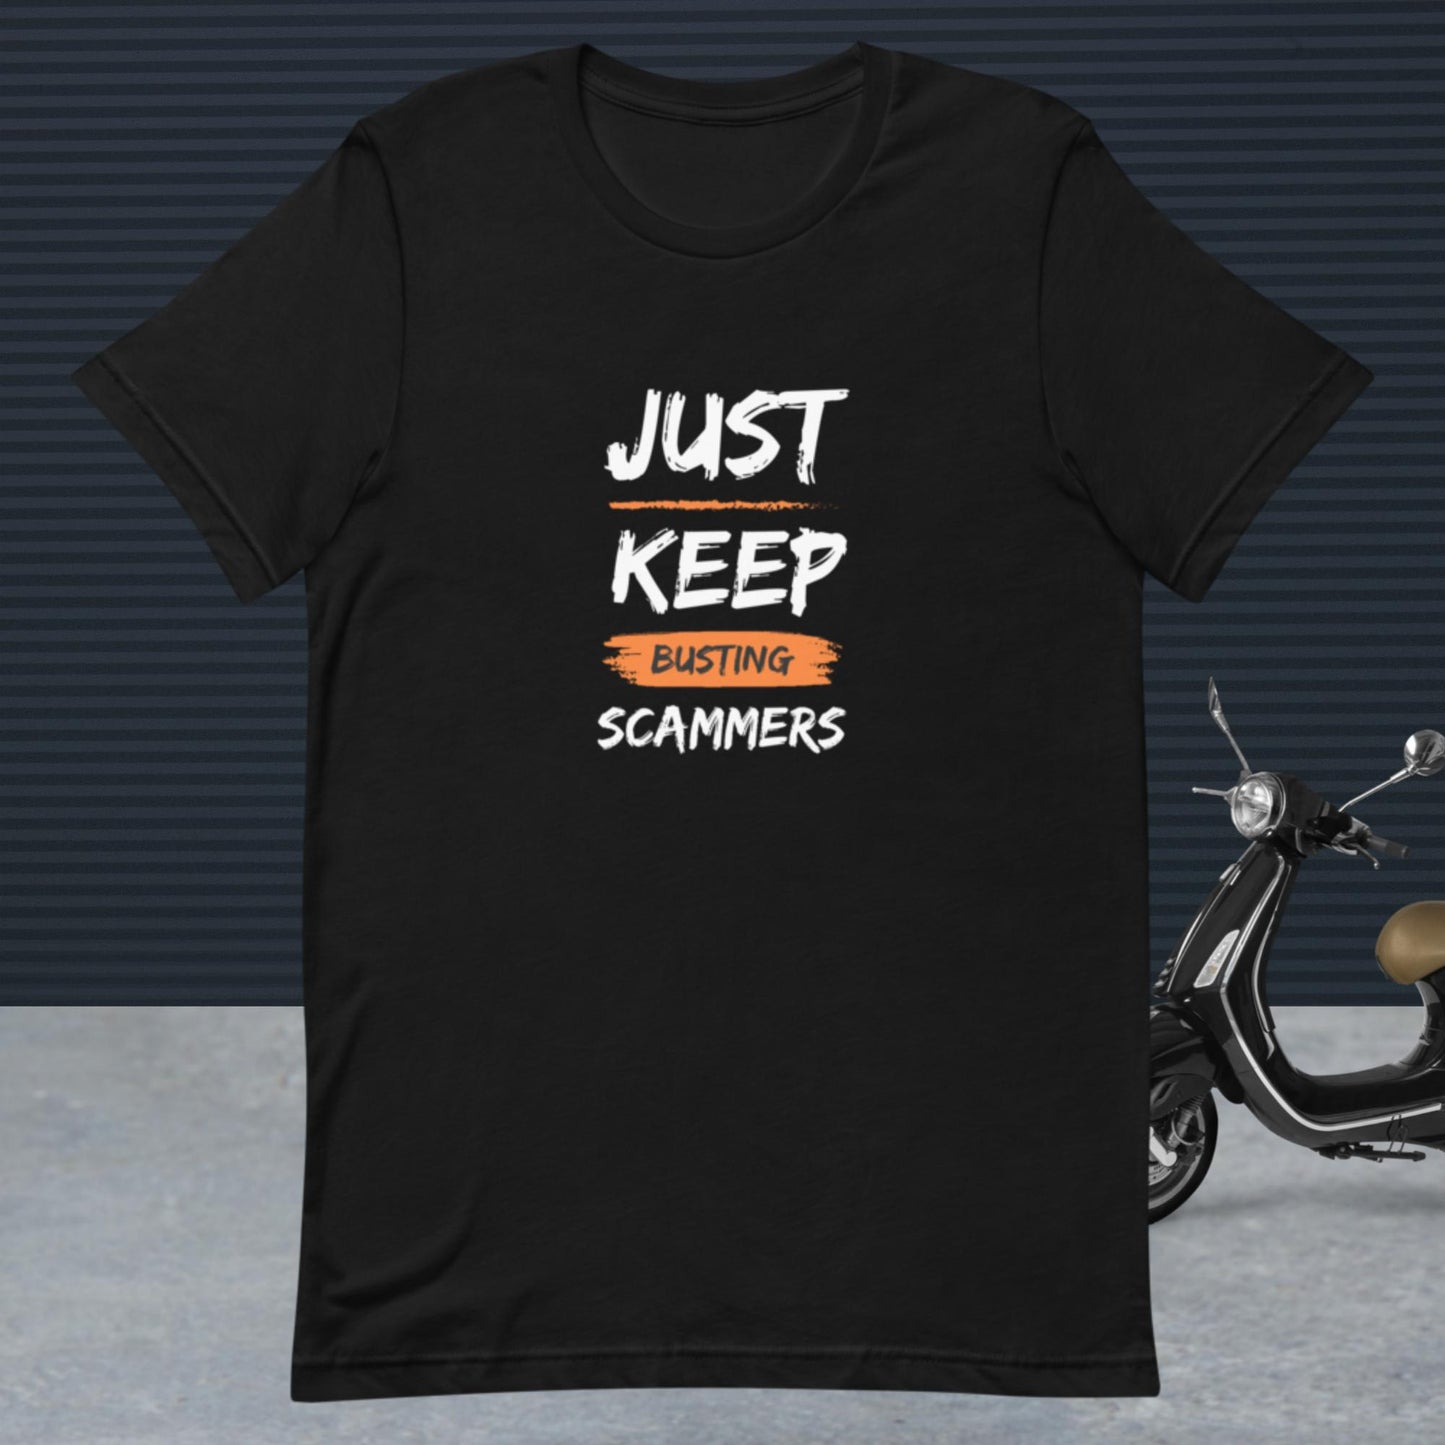 JUST KEEP BUSTING SCAMMERS | Unisex t-shirt